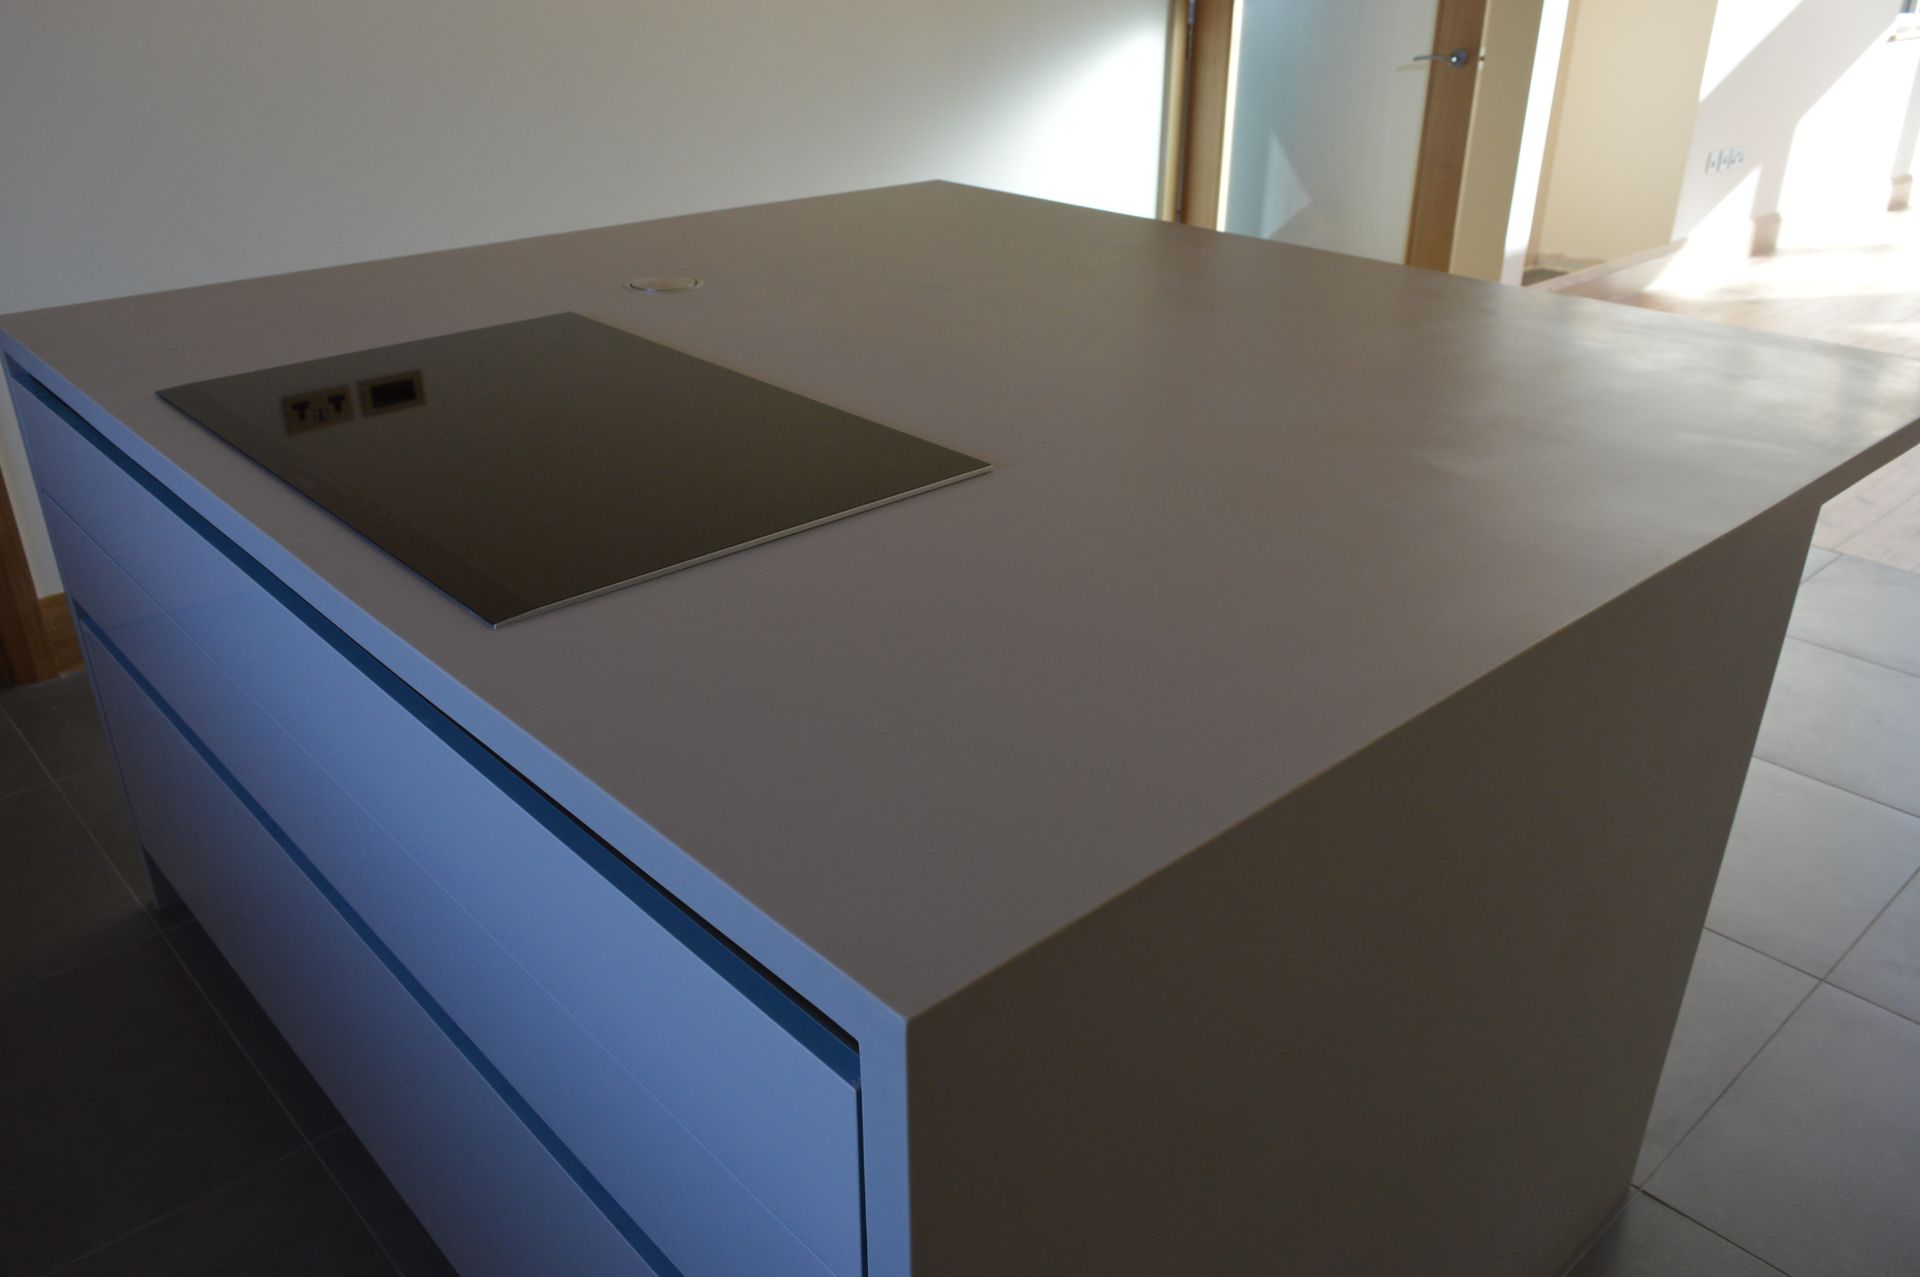 1 x Stunning KELLER Handleless FITTED KITCHEN With Corian Clay Worktops, Centre Island With - Image 29 of 104